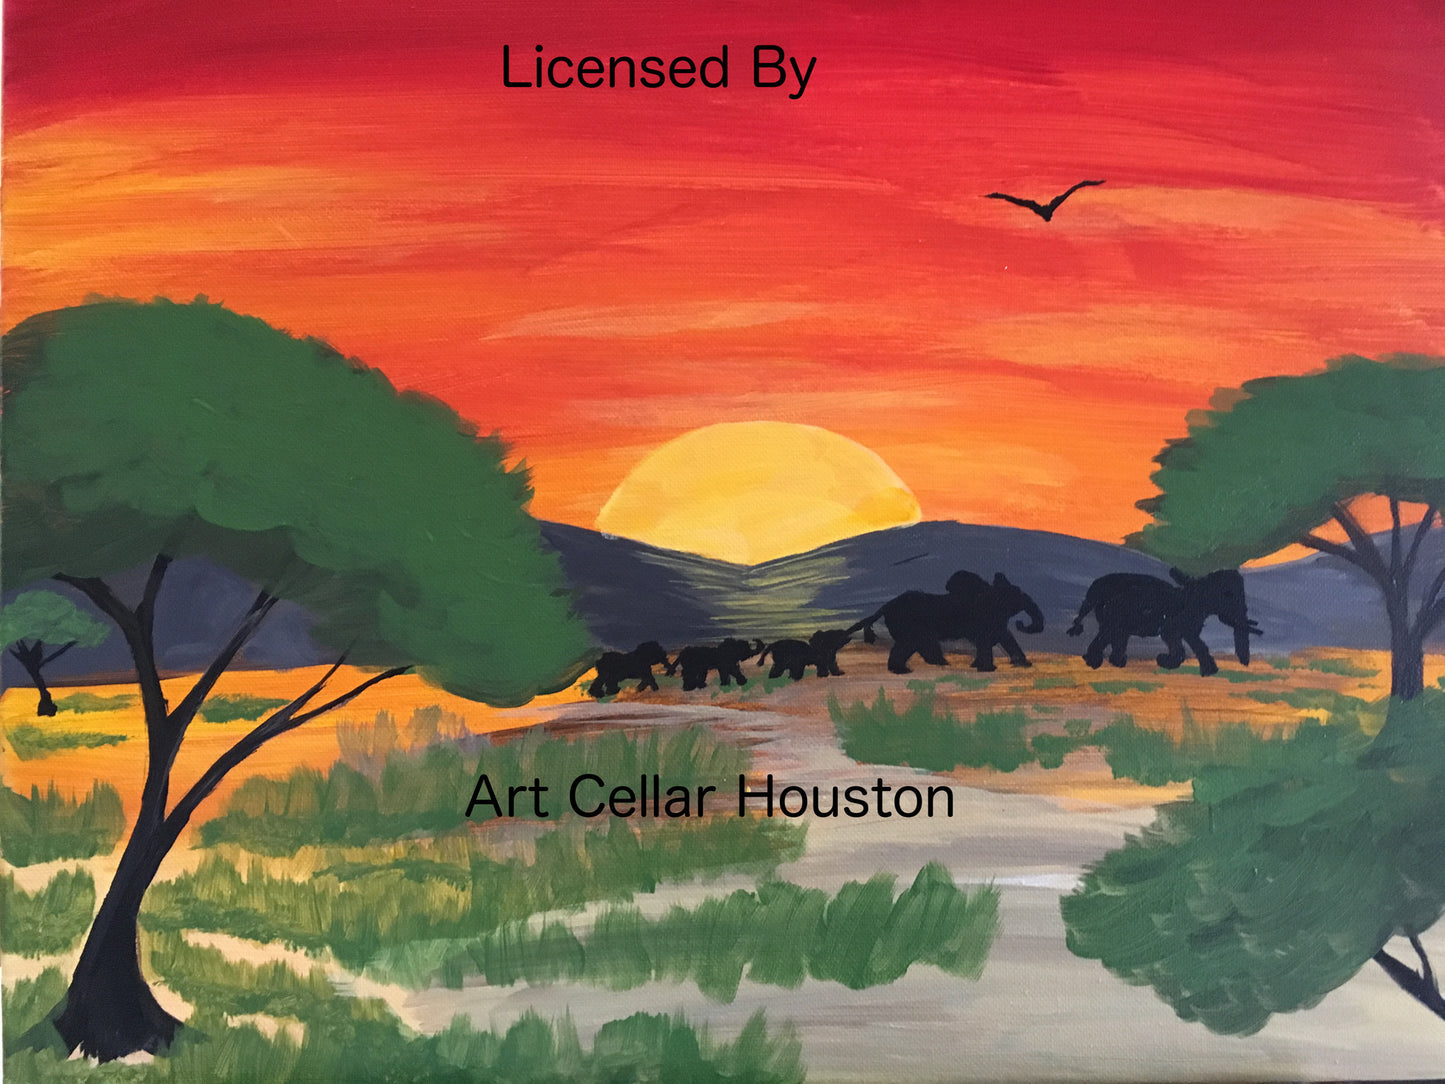 Thu, Mar 10, 12-2:30pm PRIVATE PARTY Houston Wine and Painting Class